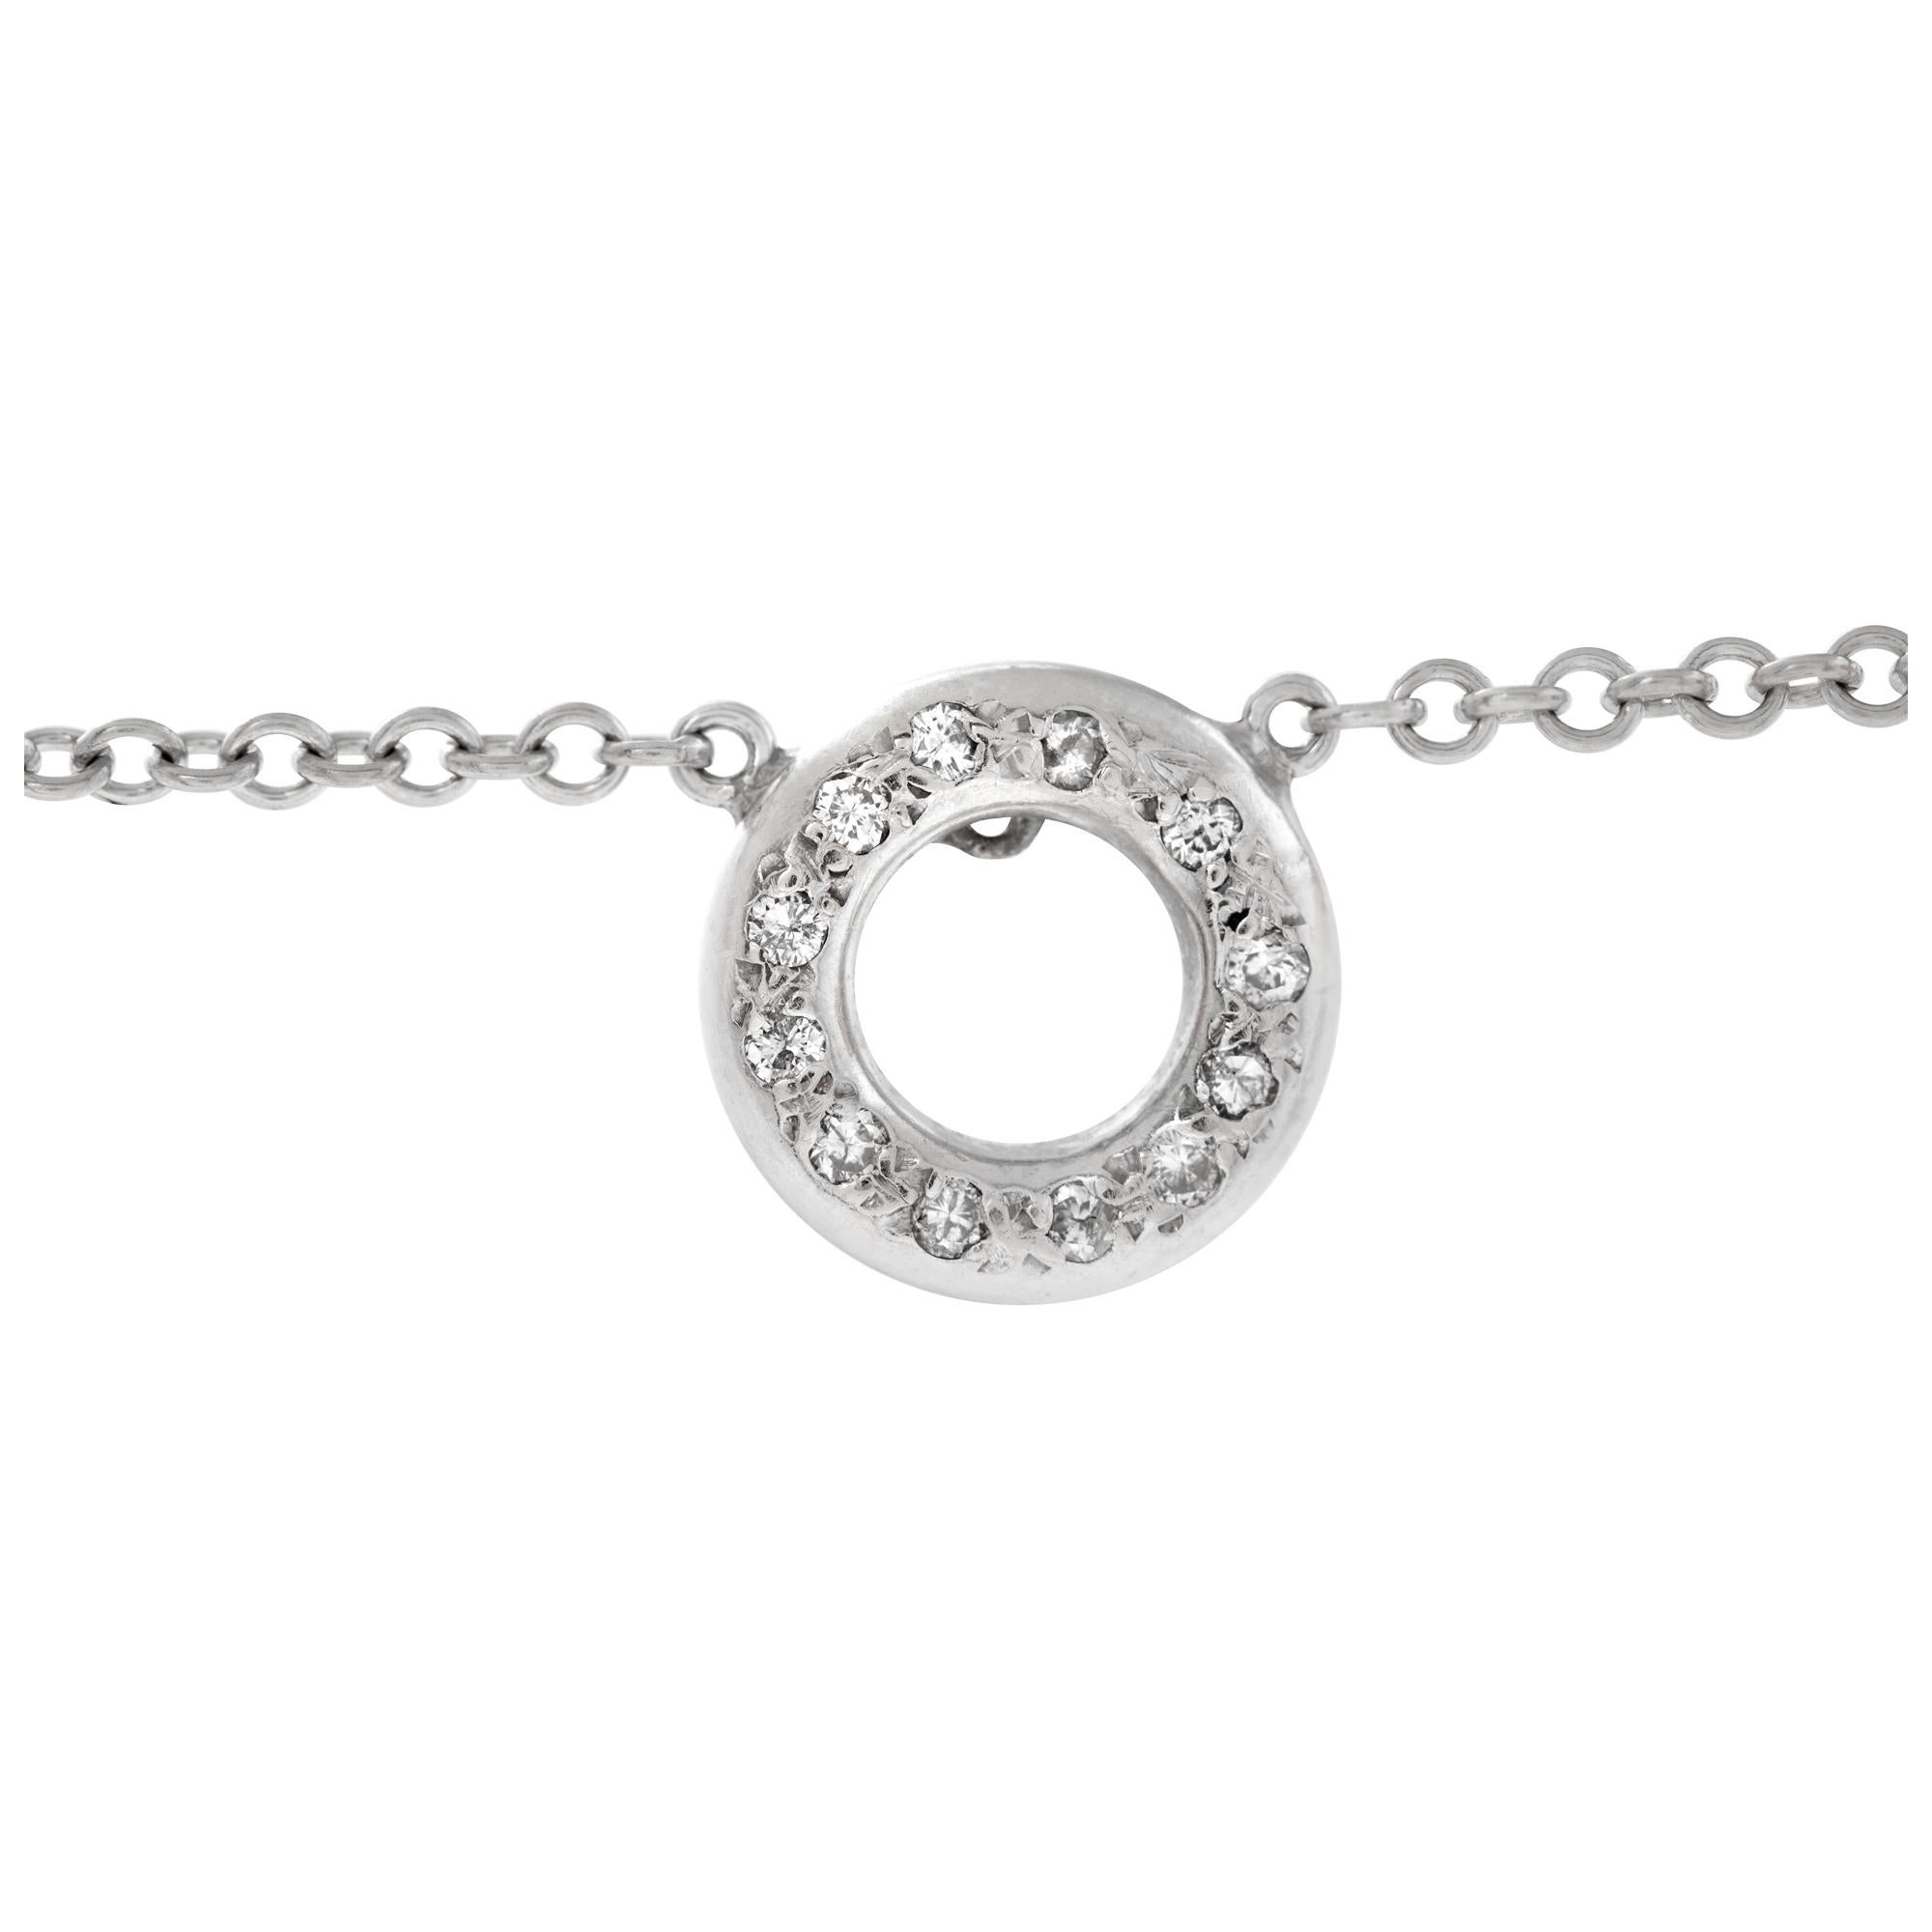 White gold bracelet with diamonds In Excellent Condition For Sale In Surfside, FL